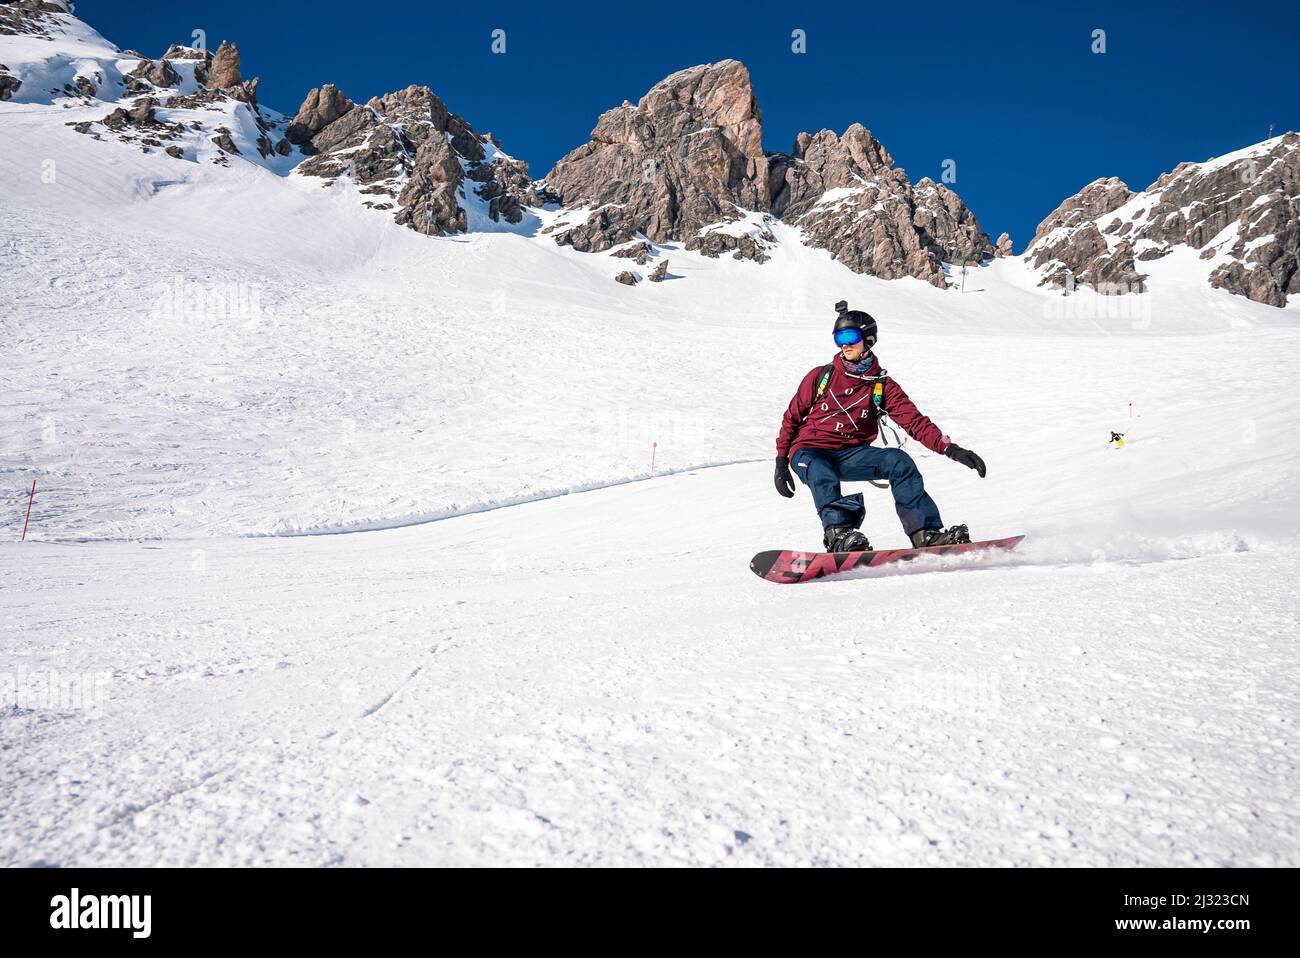 Young snowboarder sliding down snowy slope on mountain at winter resort  Stock Photo - Alamy